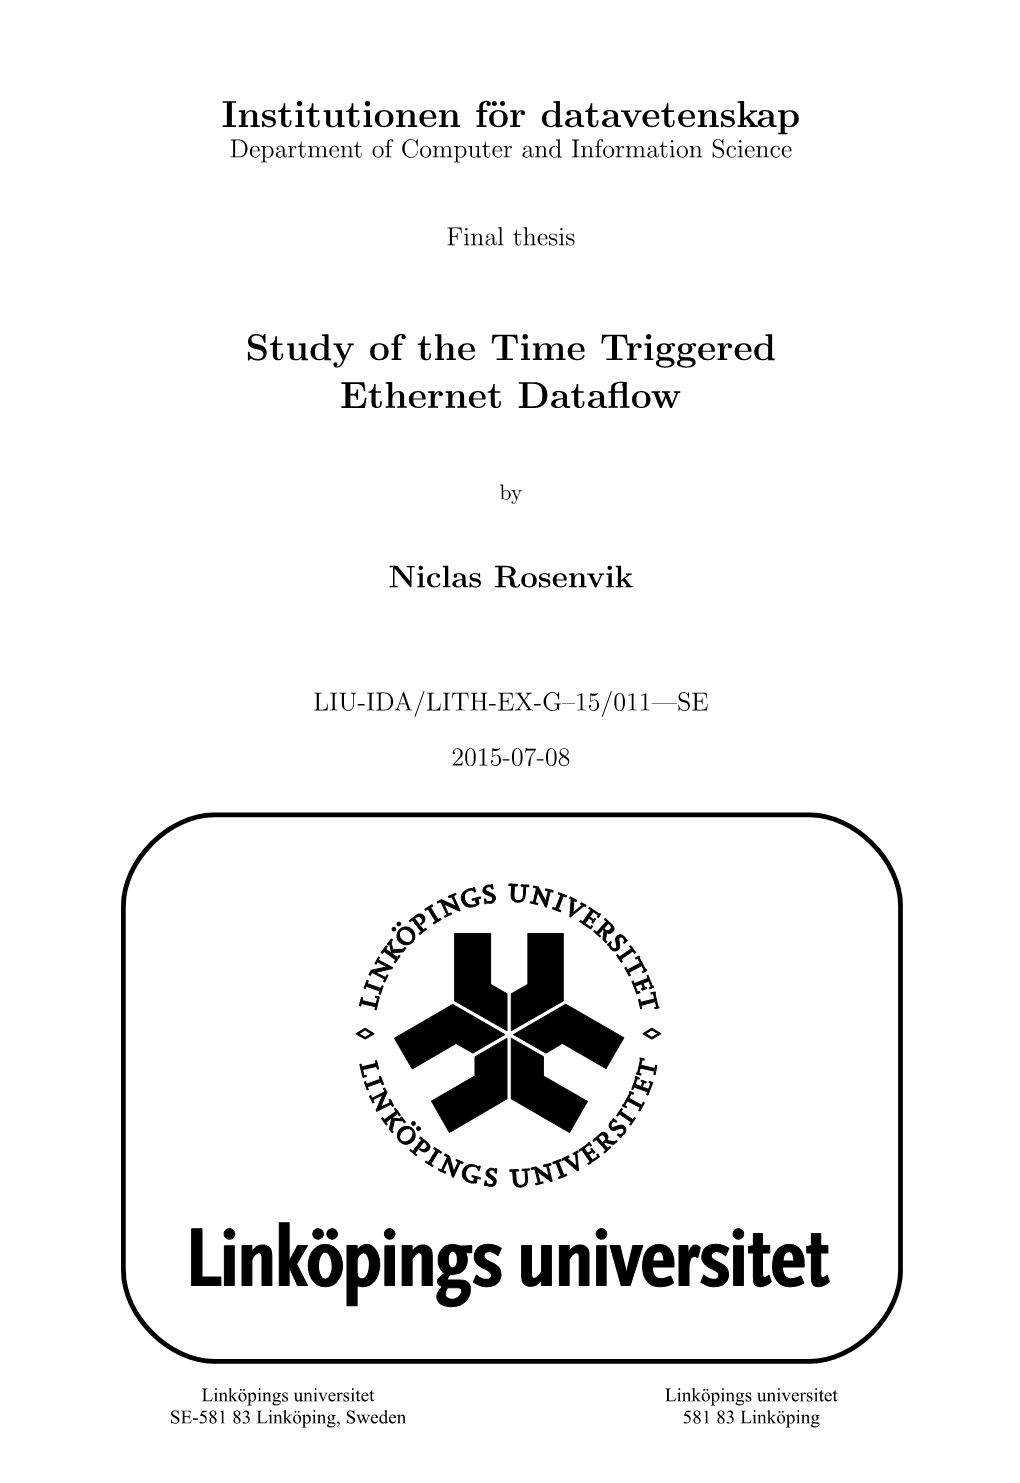 Study of the Time Triggered Ethernet Dataflow